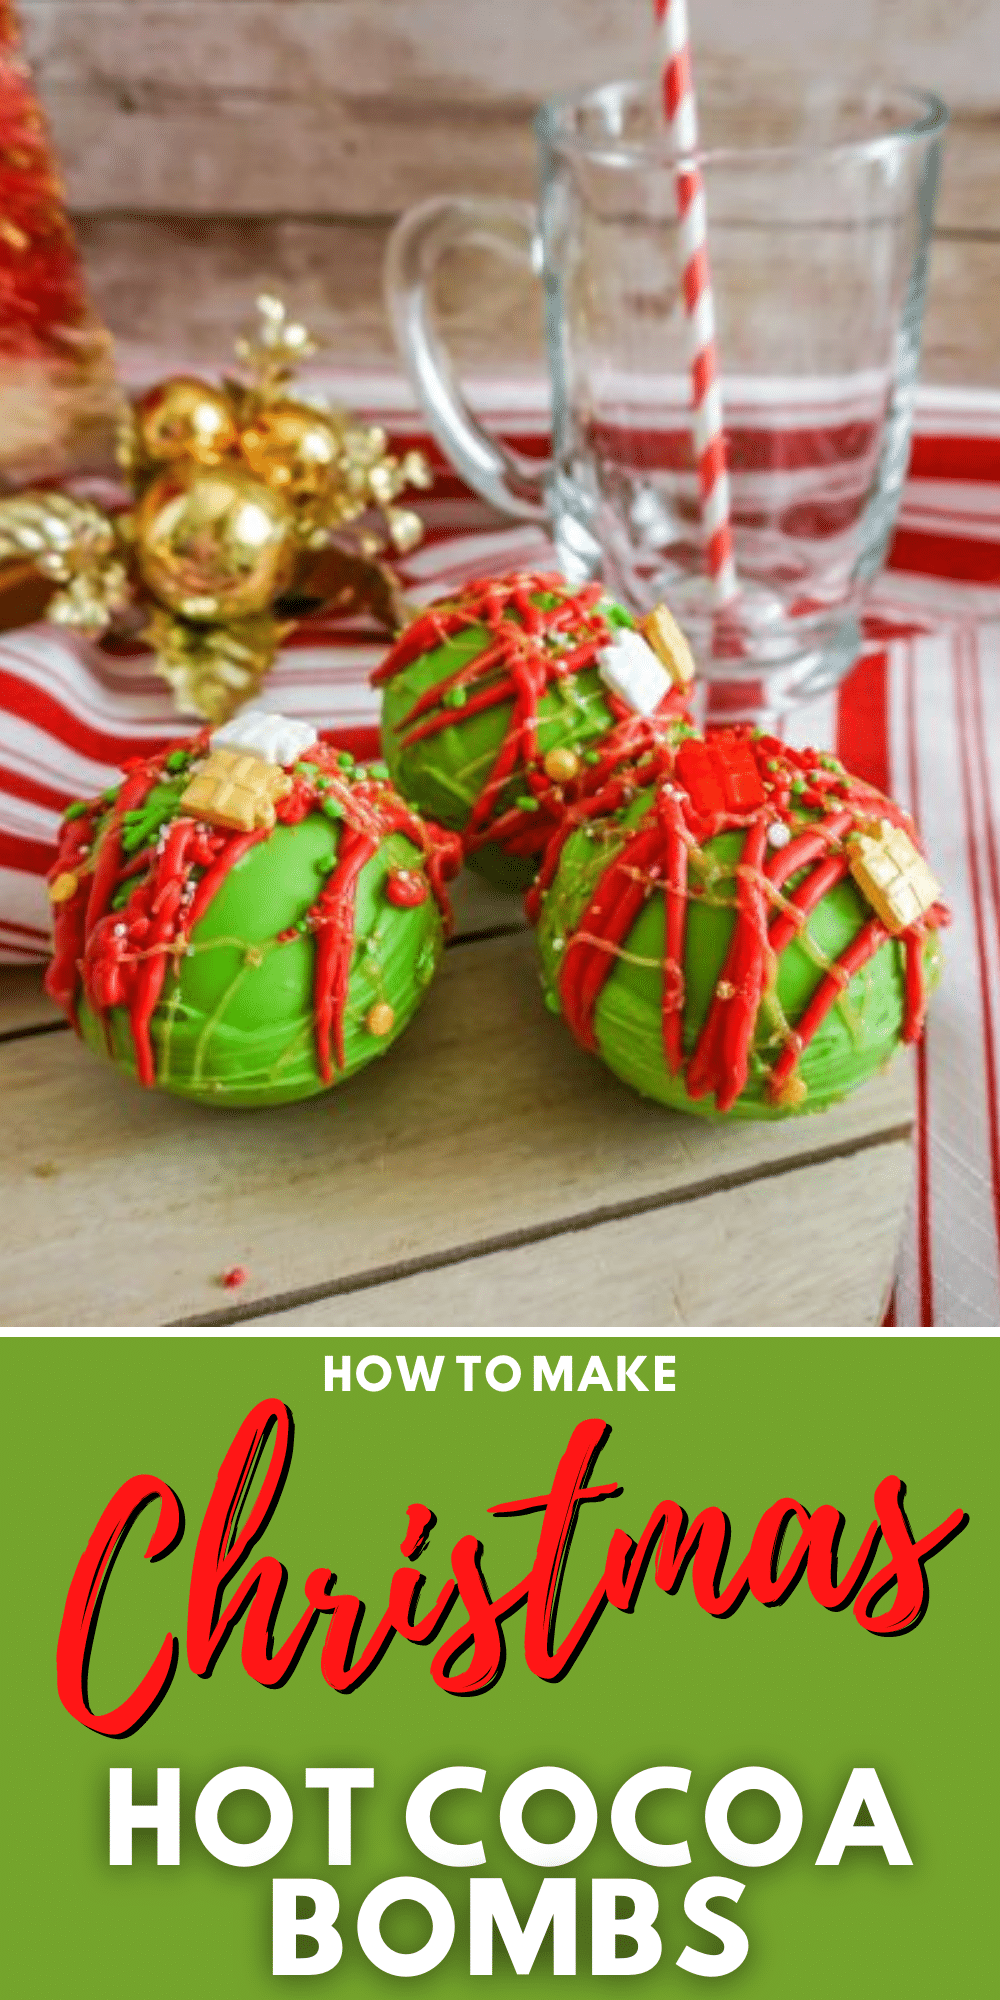 With just 6 simple ingredients needed, you're going to love the ease and flavor of these Christmas Hot Cocoa Bombs! #hotcocoa #hotcocoabombs #hotchocolate #christmas via @wondermomwannab